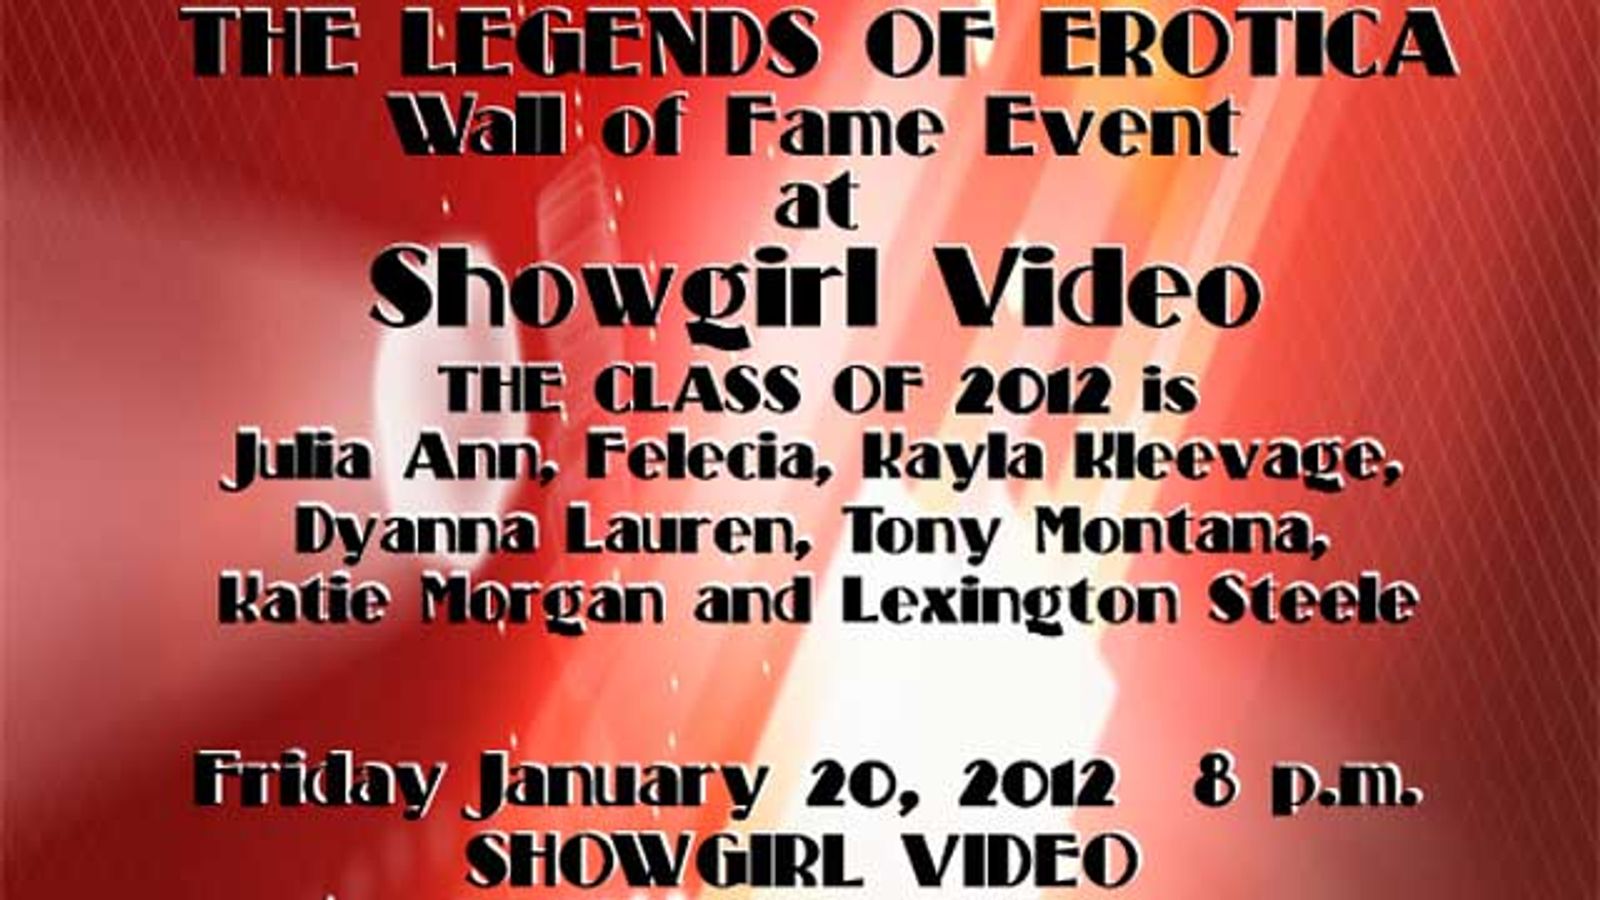 If It's AEE, It Must Be Time for Another Legends of Erotica Show!